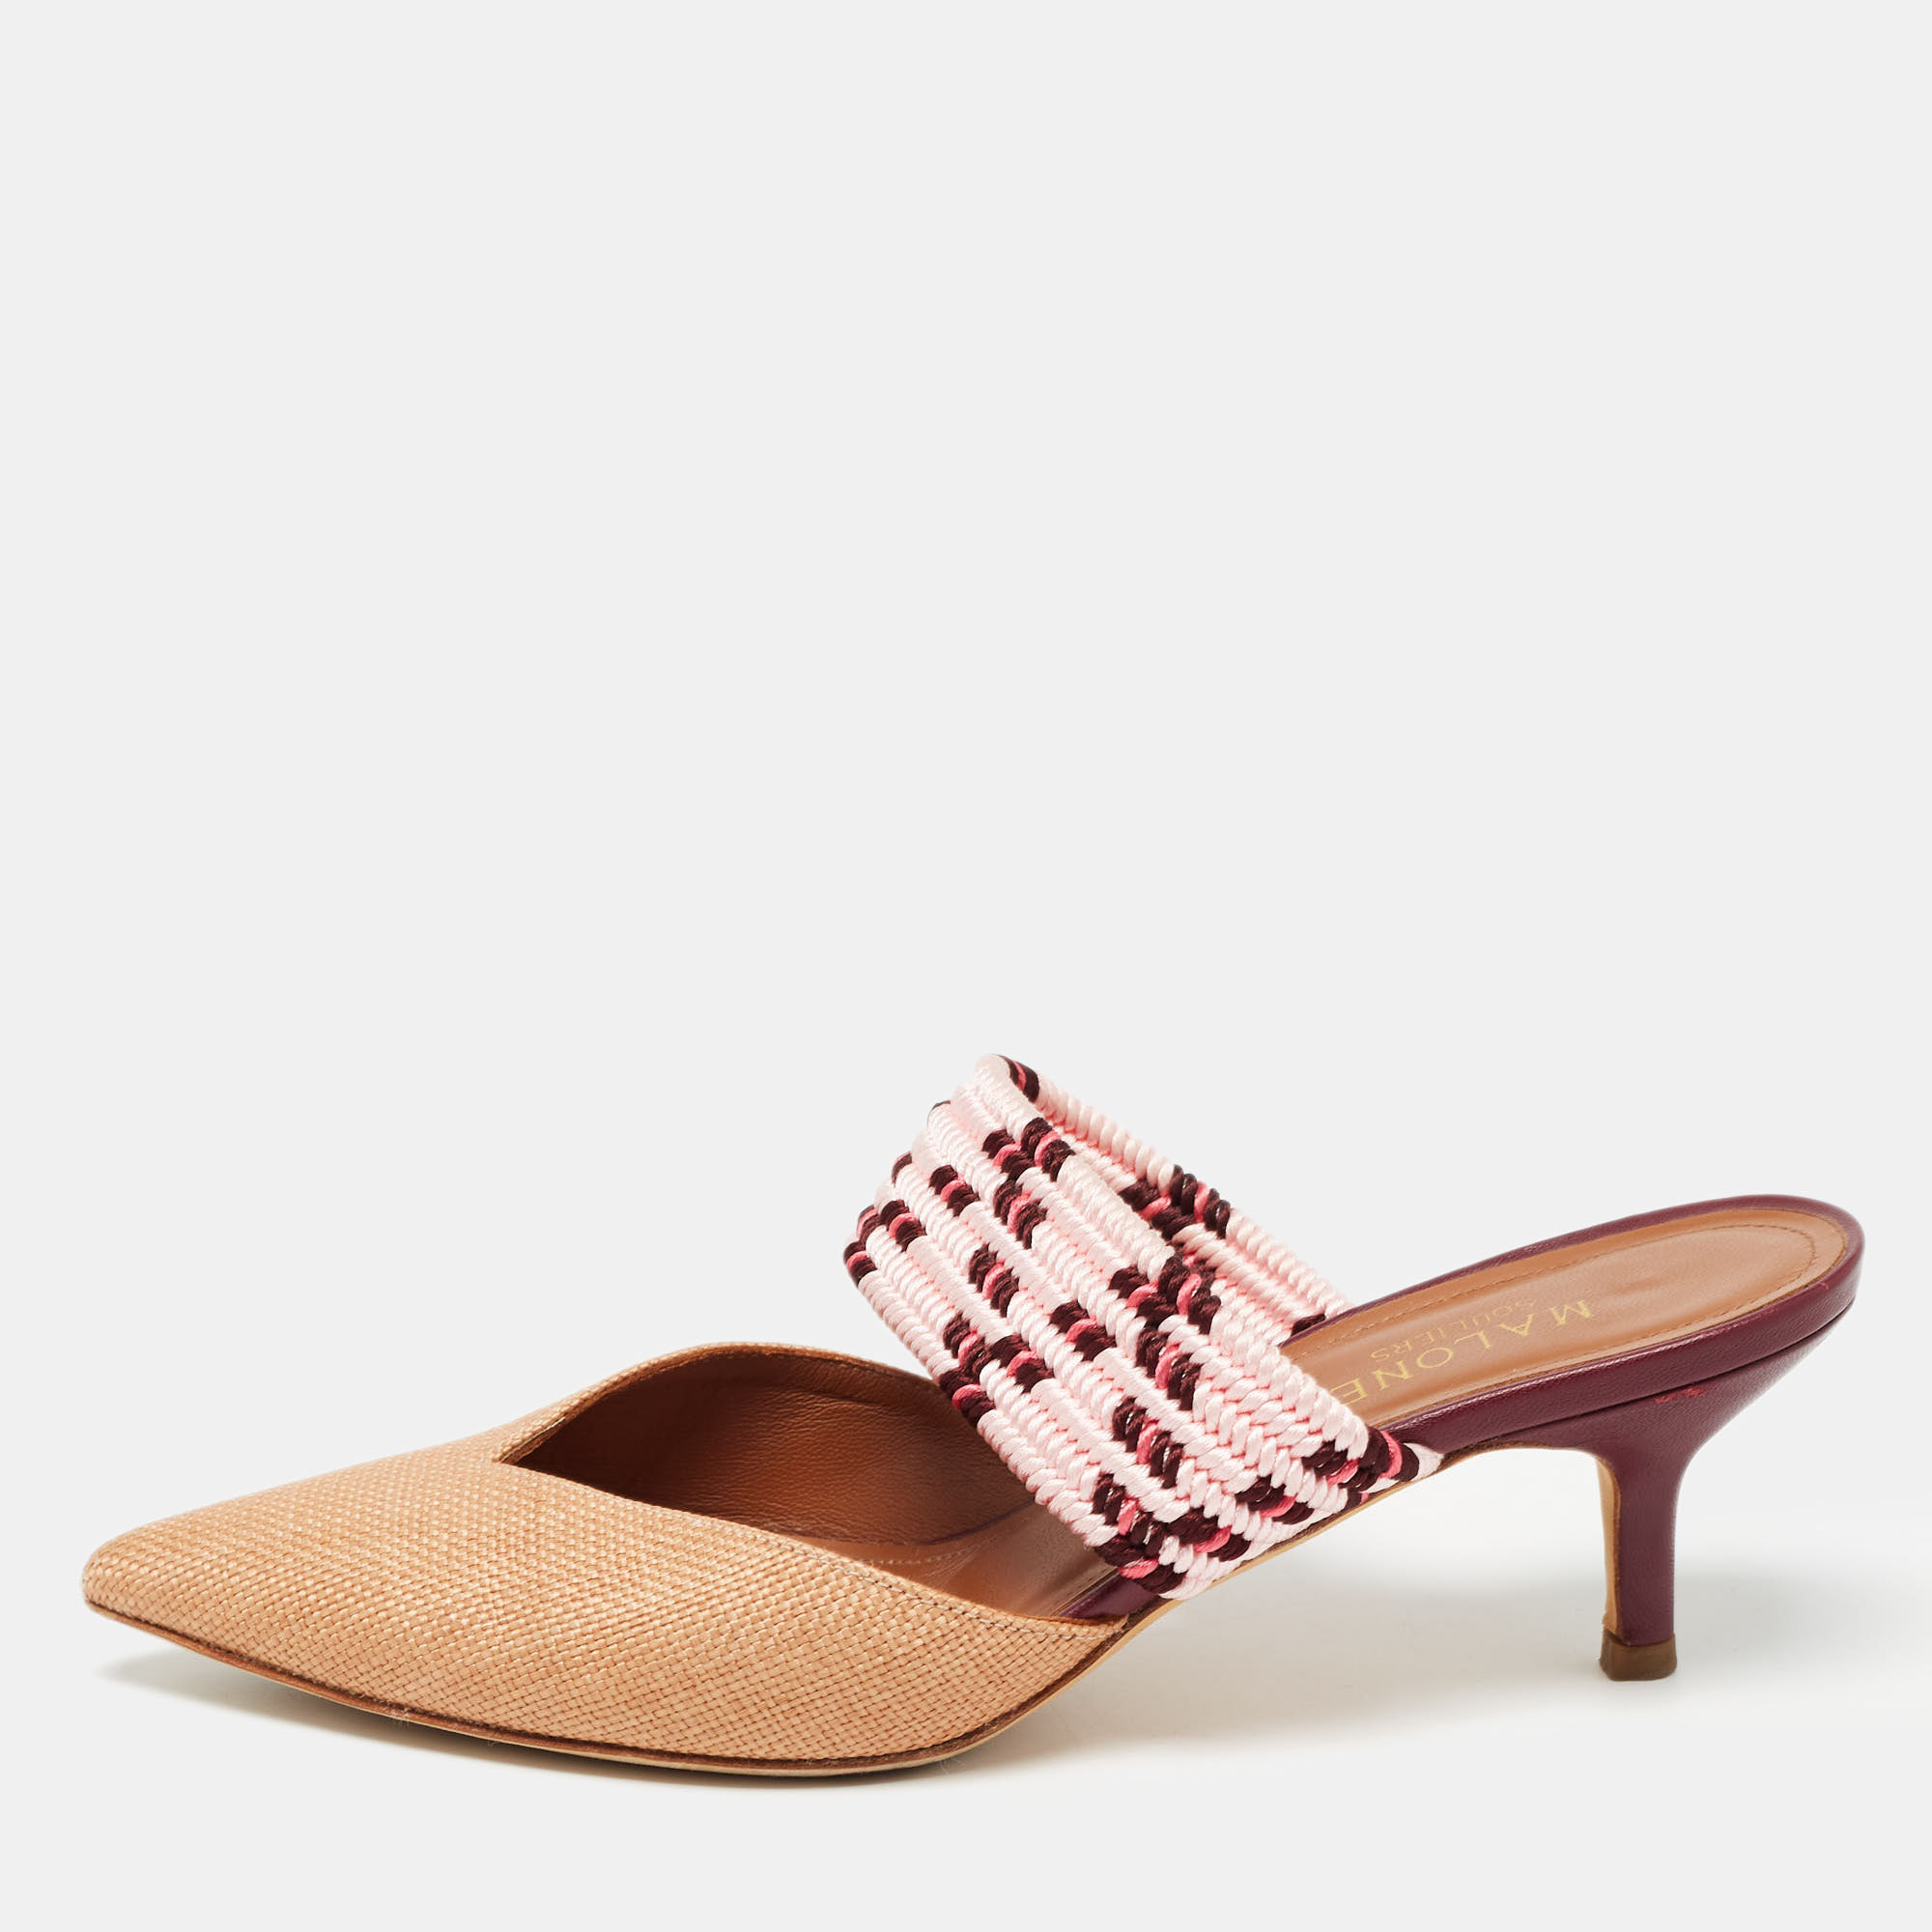 A perfect blend of luxury style and comfort these designer mules are made using quality materials and frame your feet in the most elegant way. They can be paired with a host of outfits from your wardrobe.